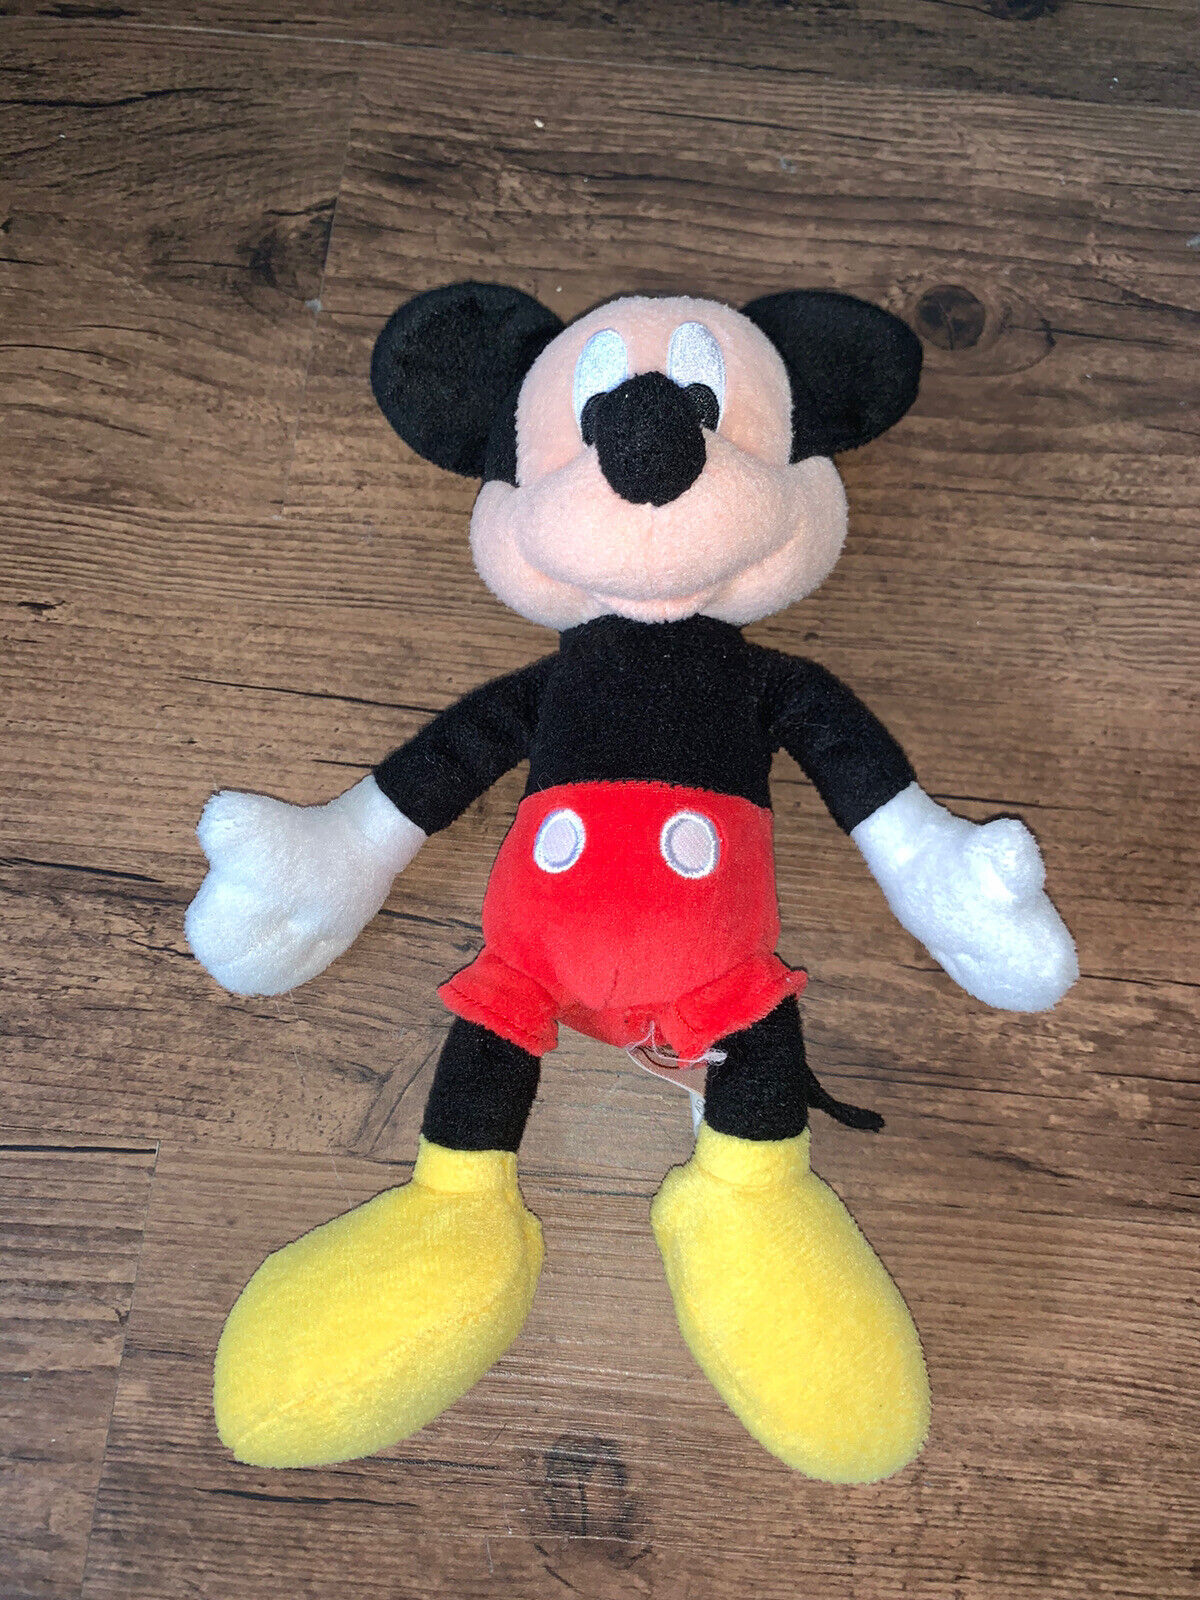 Original Disney Mickey Mouse Plush | With Tags | In good Condtion 10”